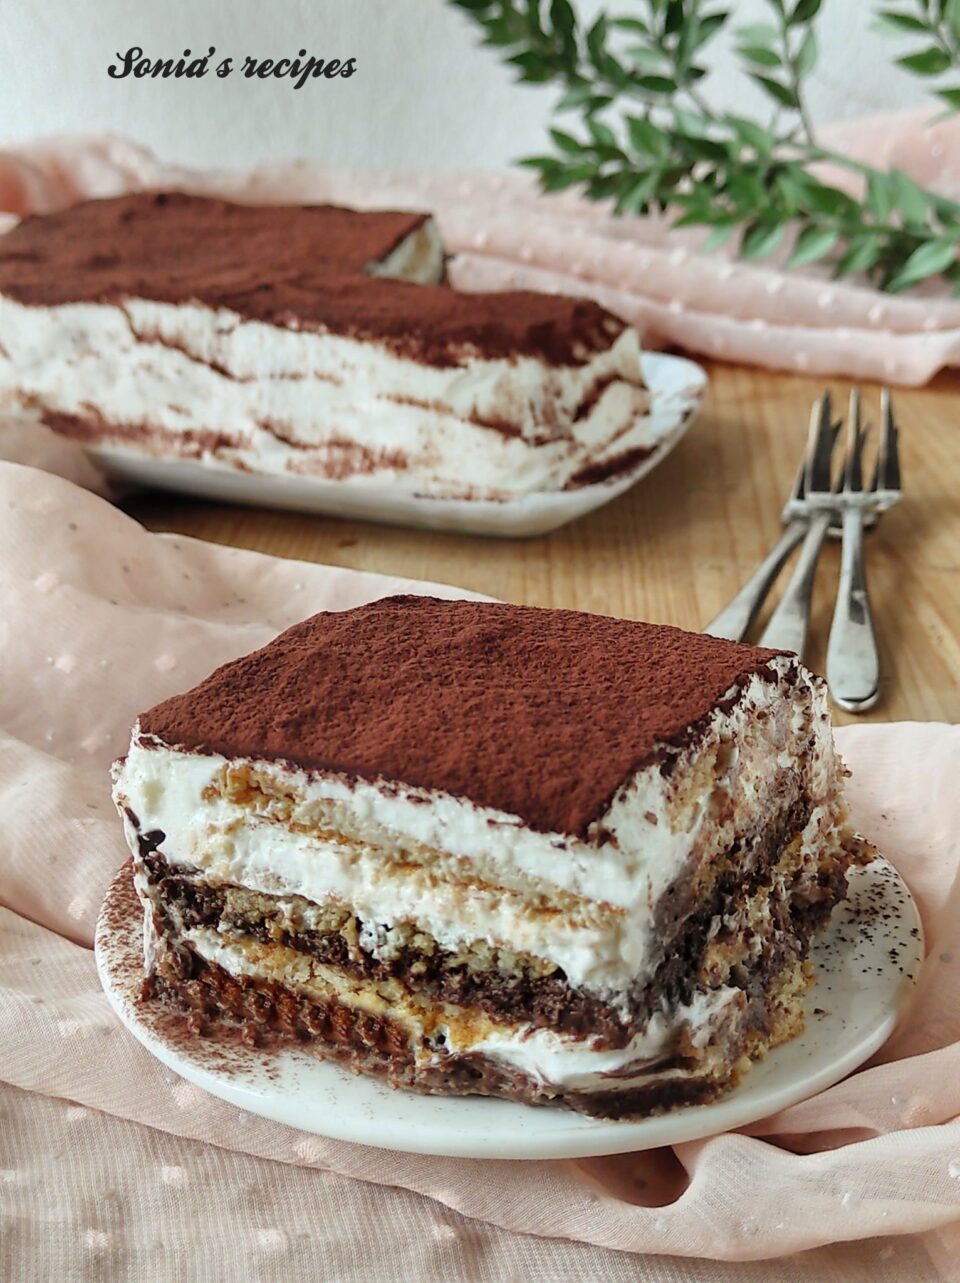 Lasagna with cream and chocolate cookies